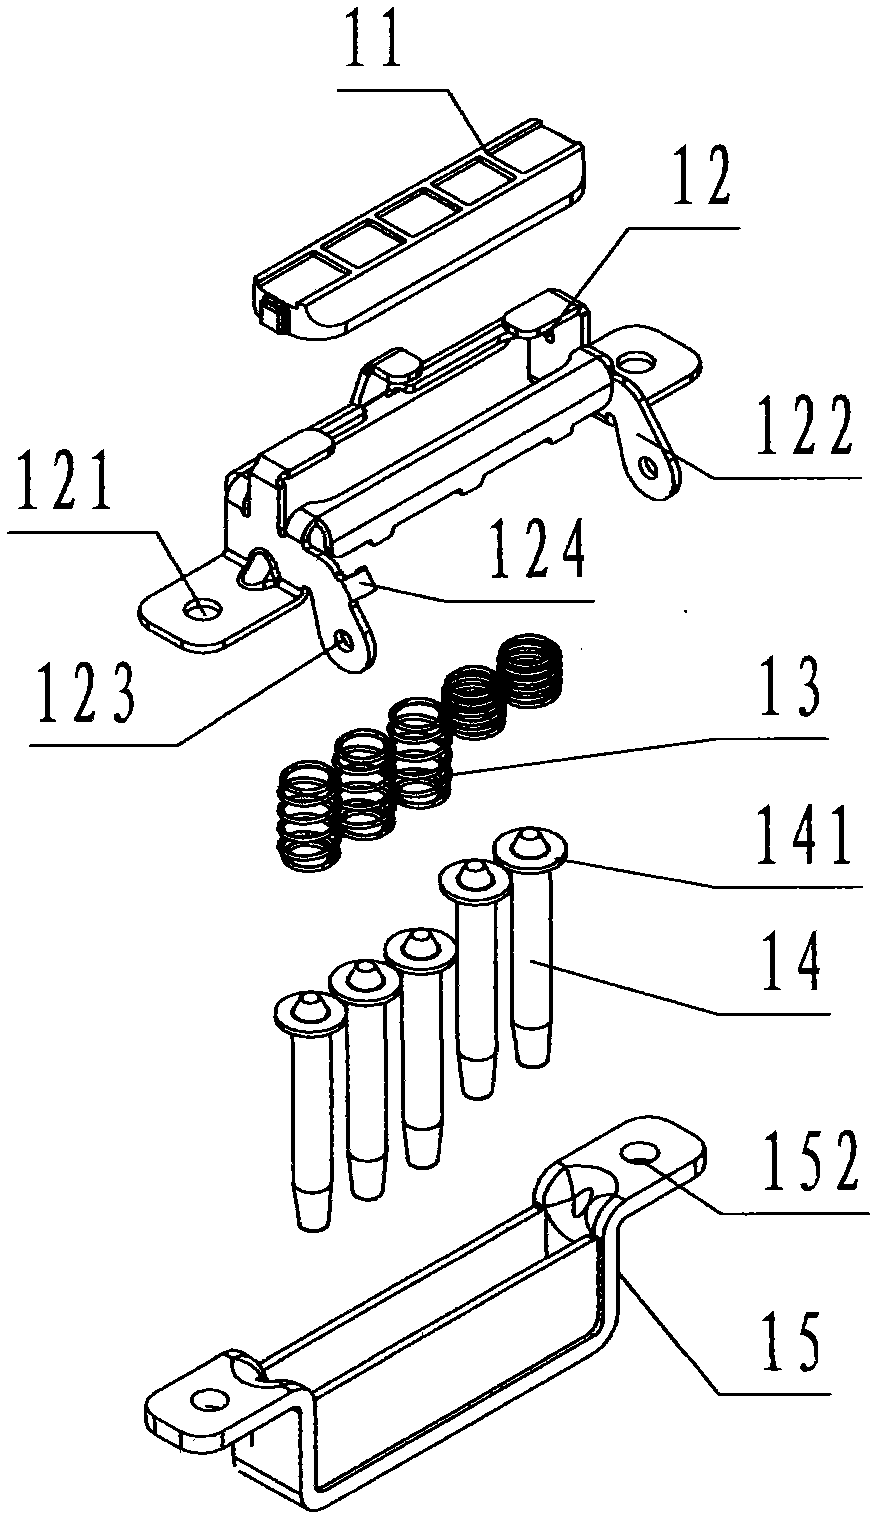 Built-in five-pin locking device for automobile seat slide rail